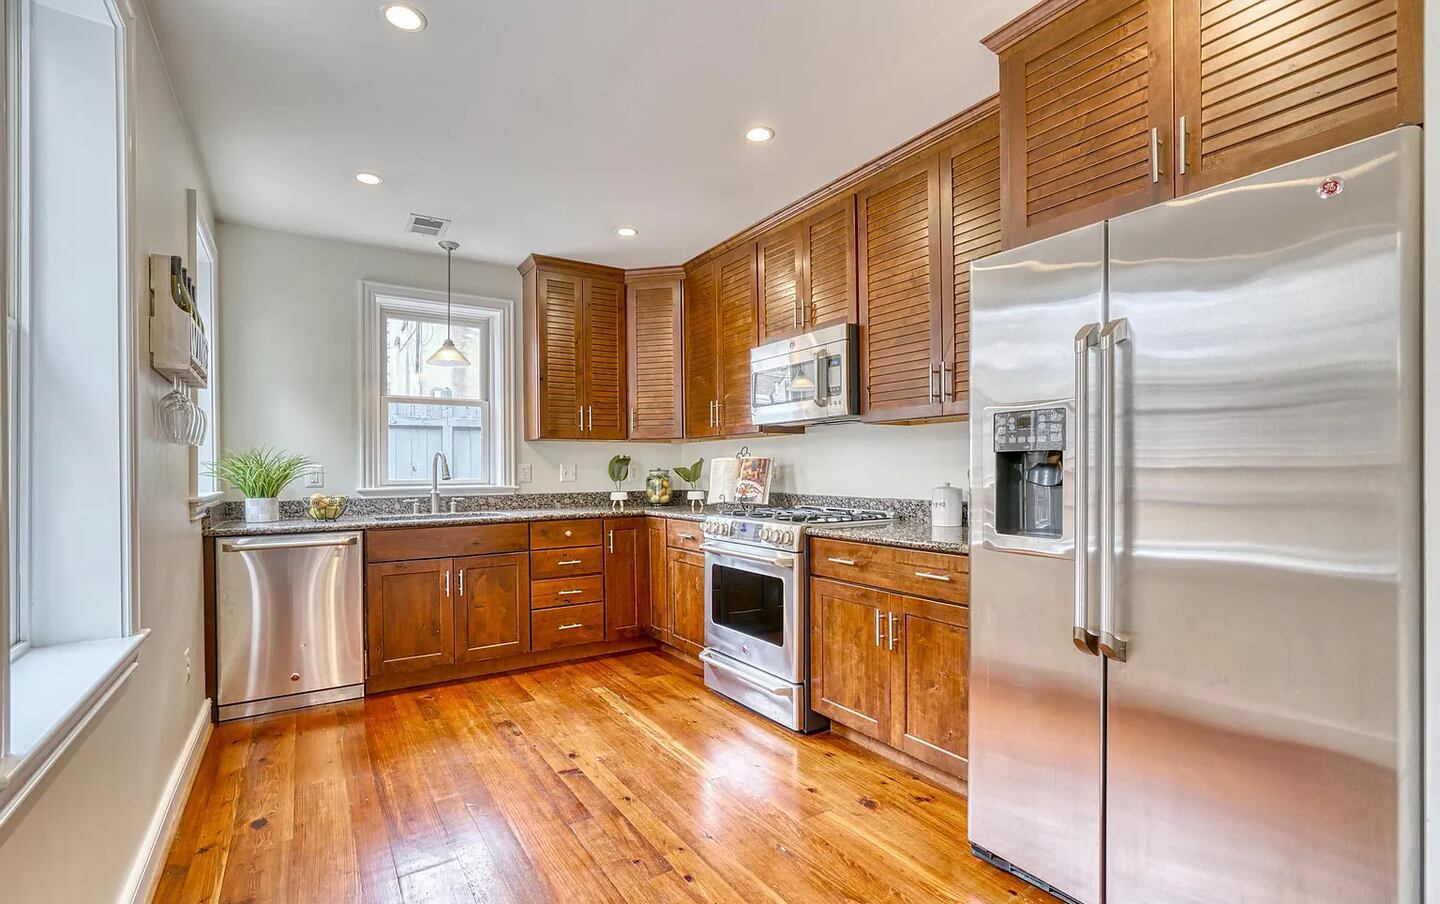 Renovated 1790s rowhome in Fells Point.